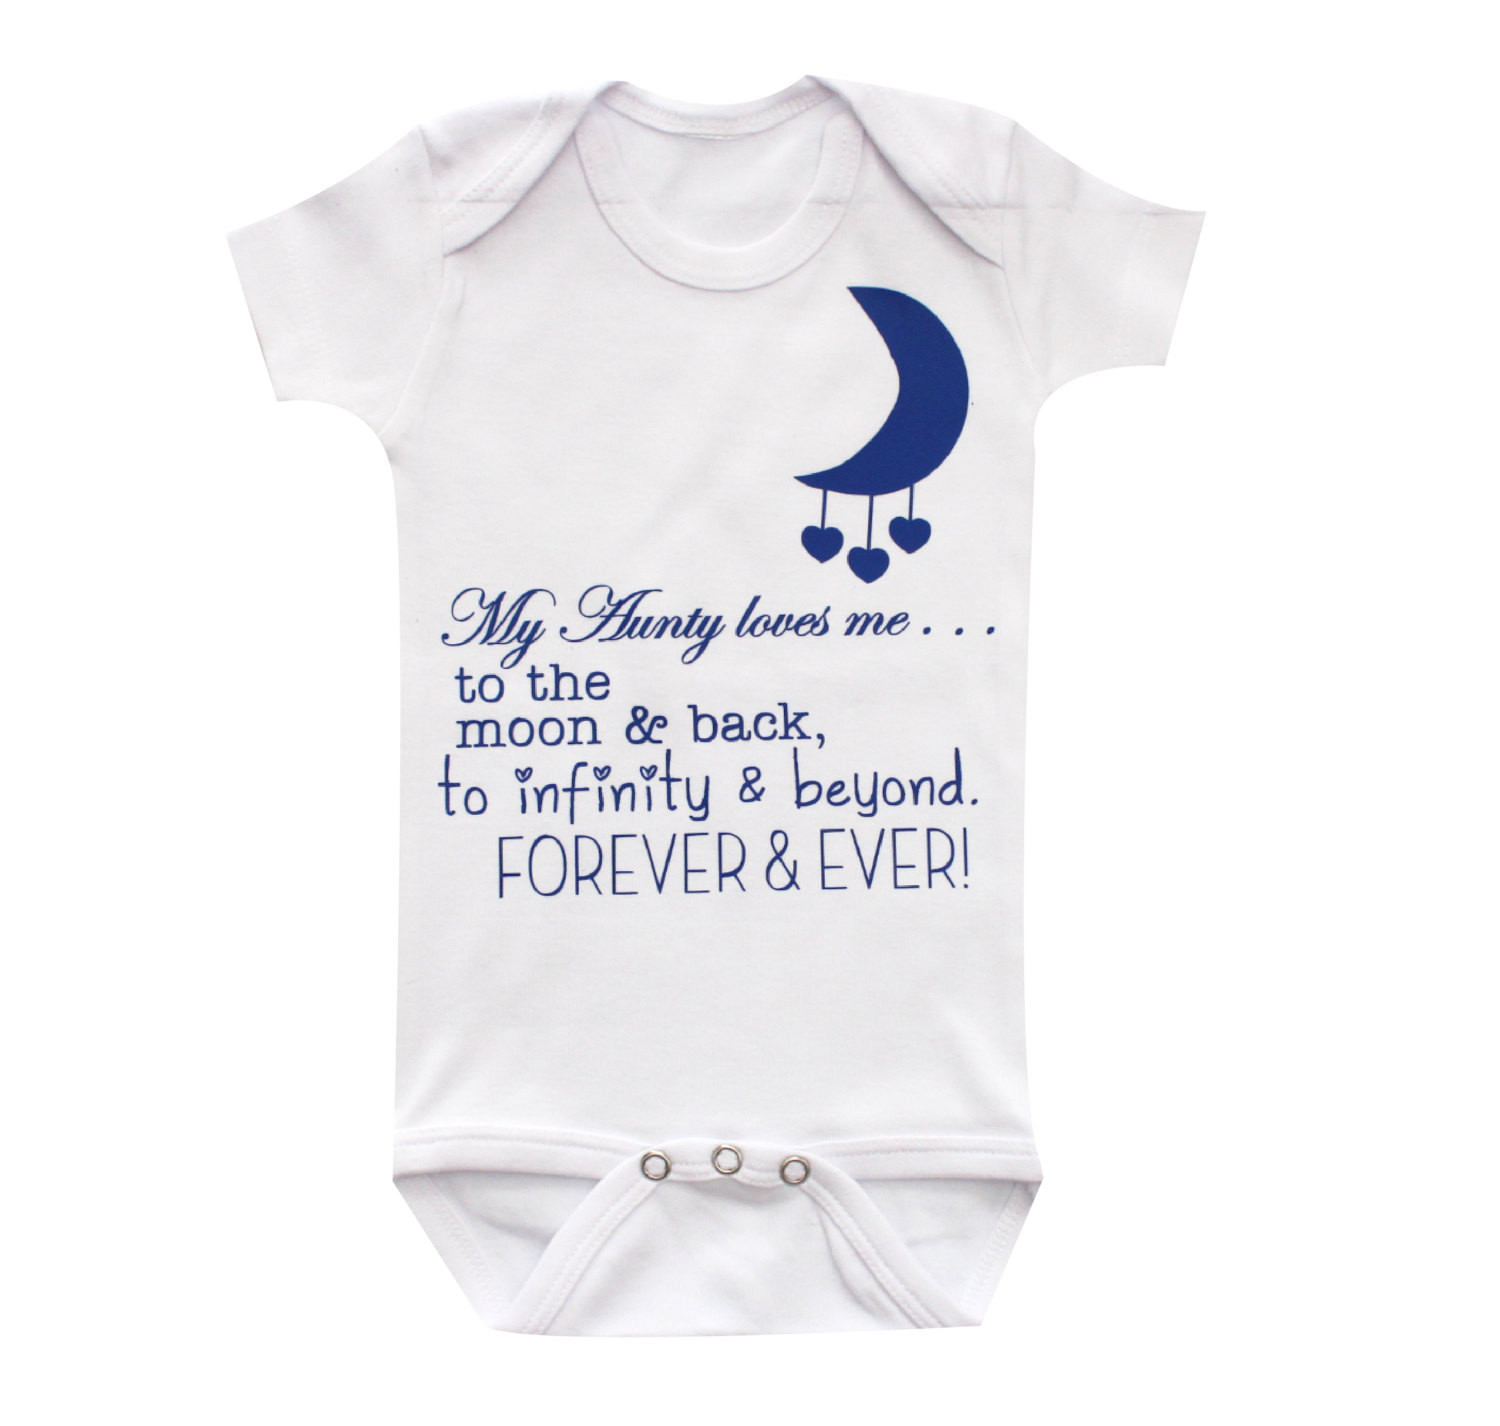 Aunties Baby Quotes
 Aunt baby clothing Aunty loves you to the moon and back cute